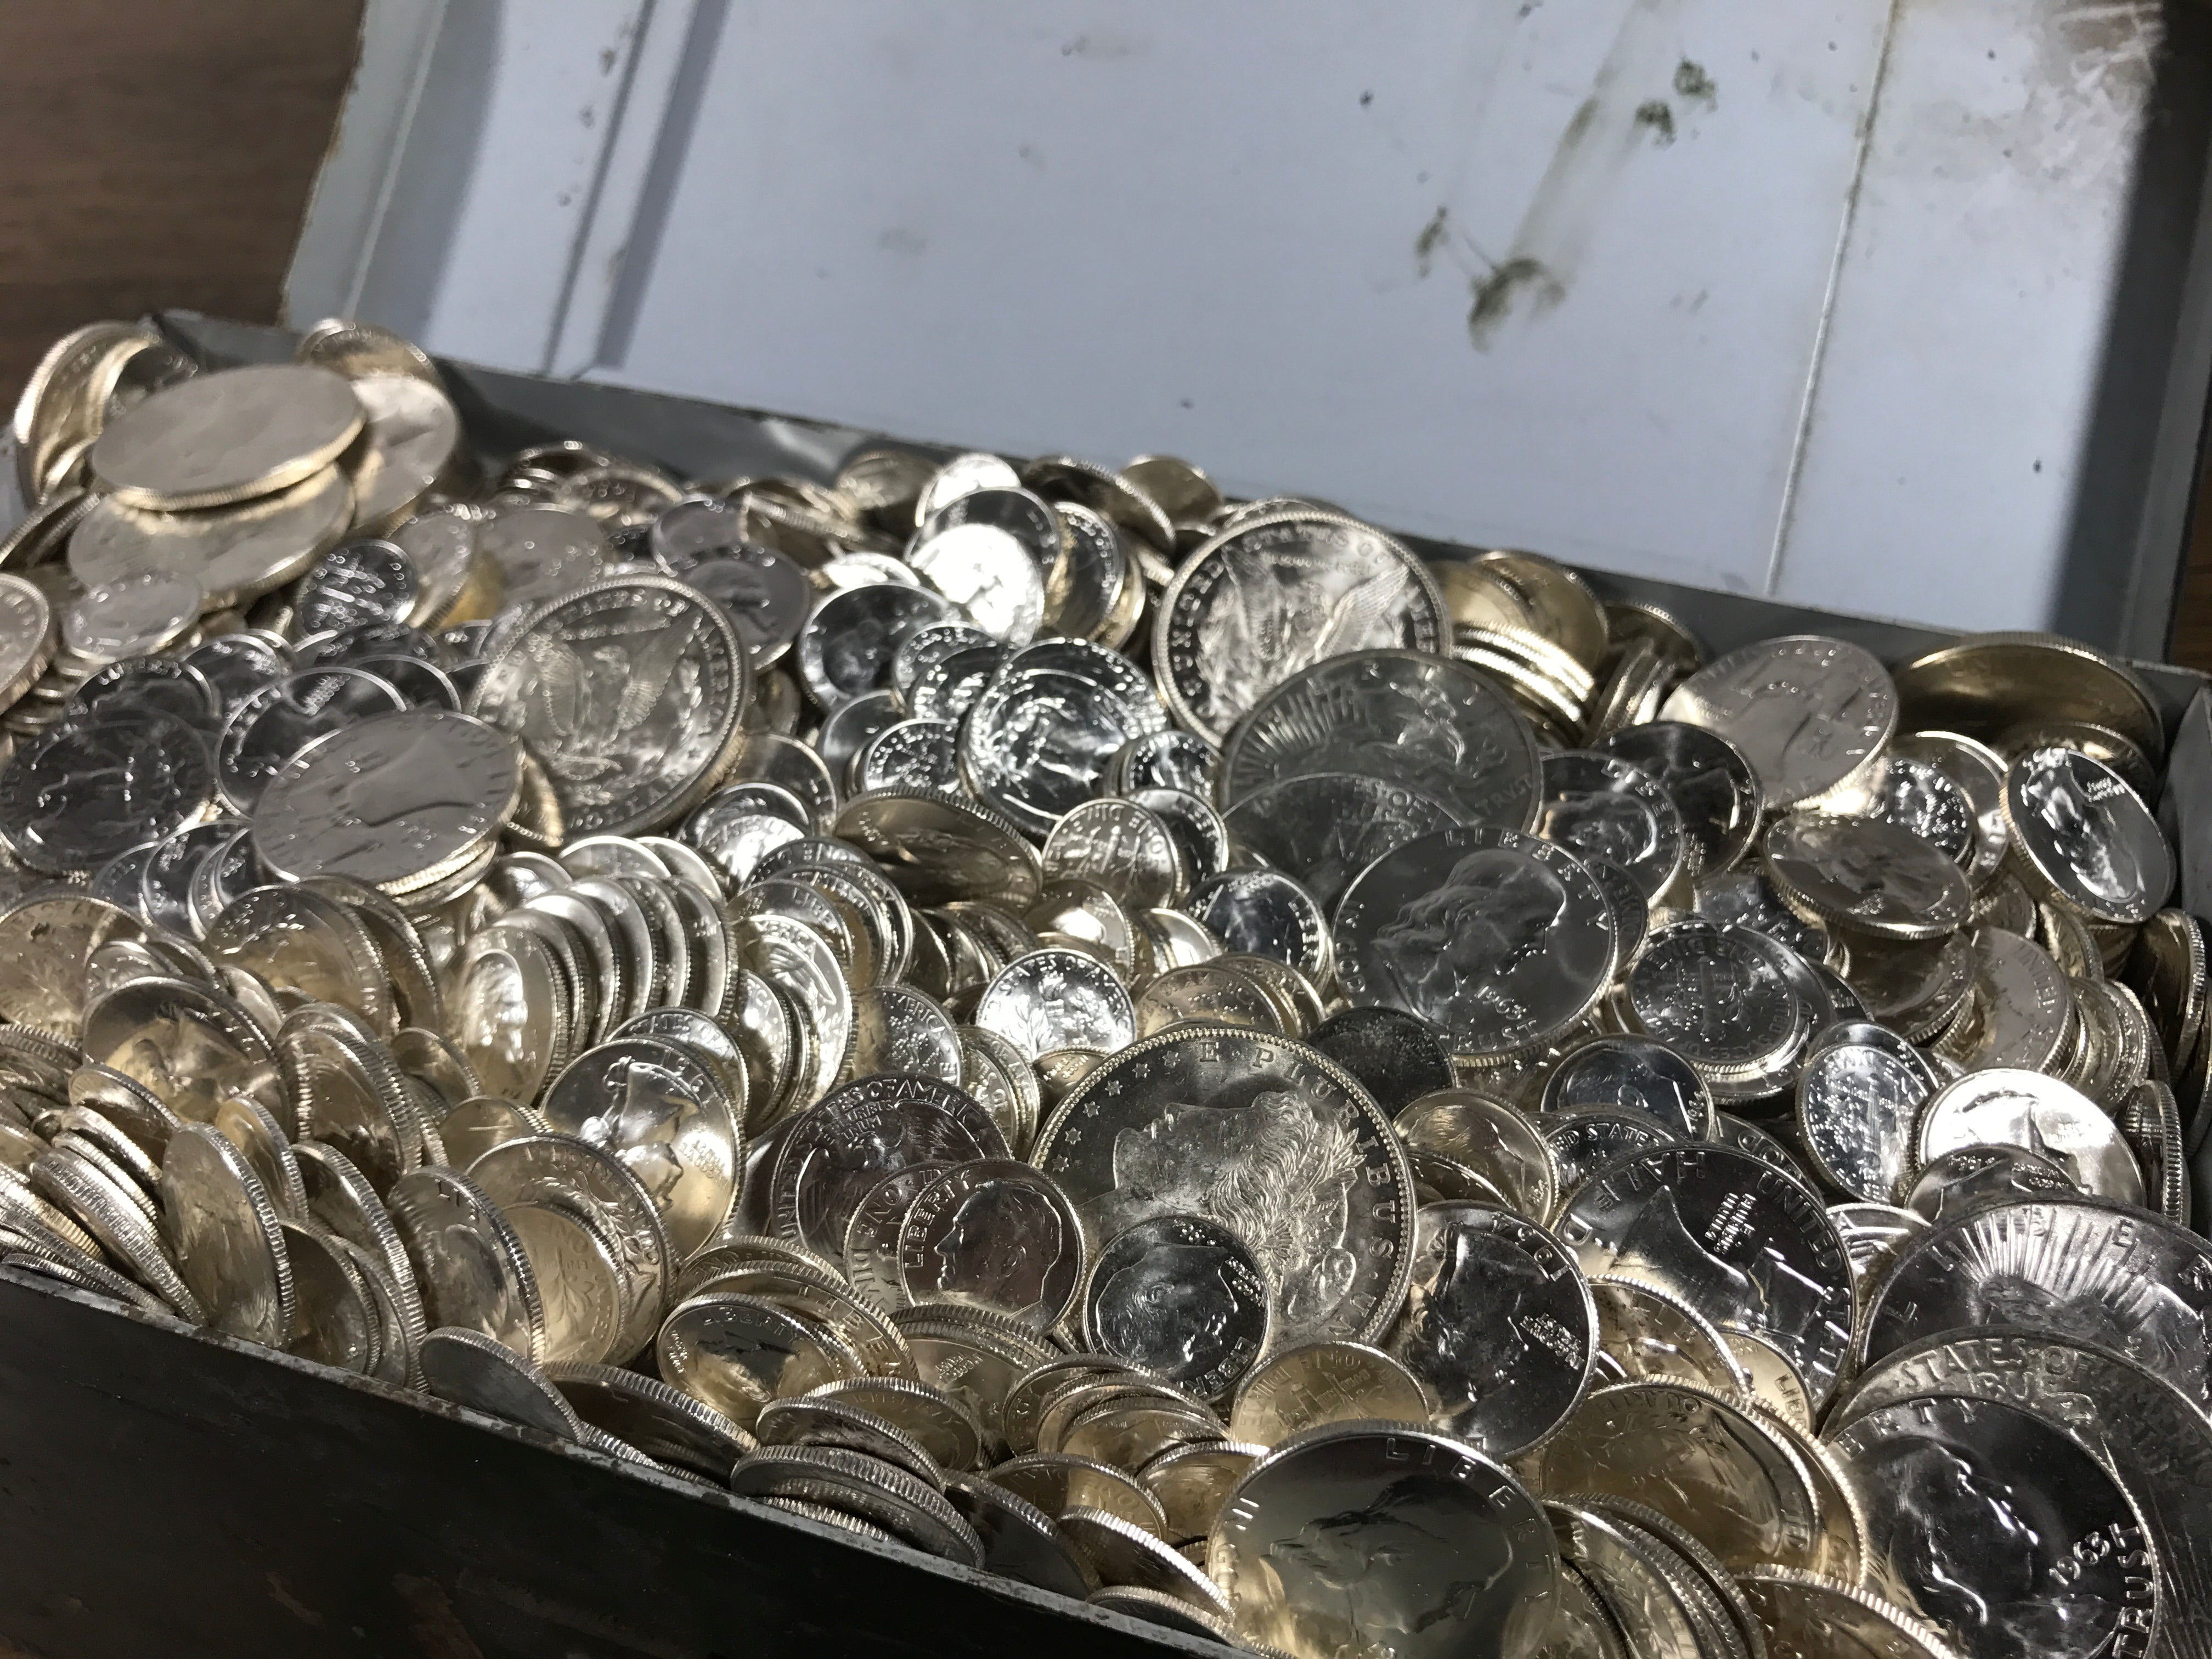 Mixed Coin Lots | Old U.S. Coin Grab Bags